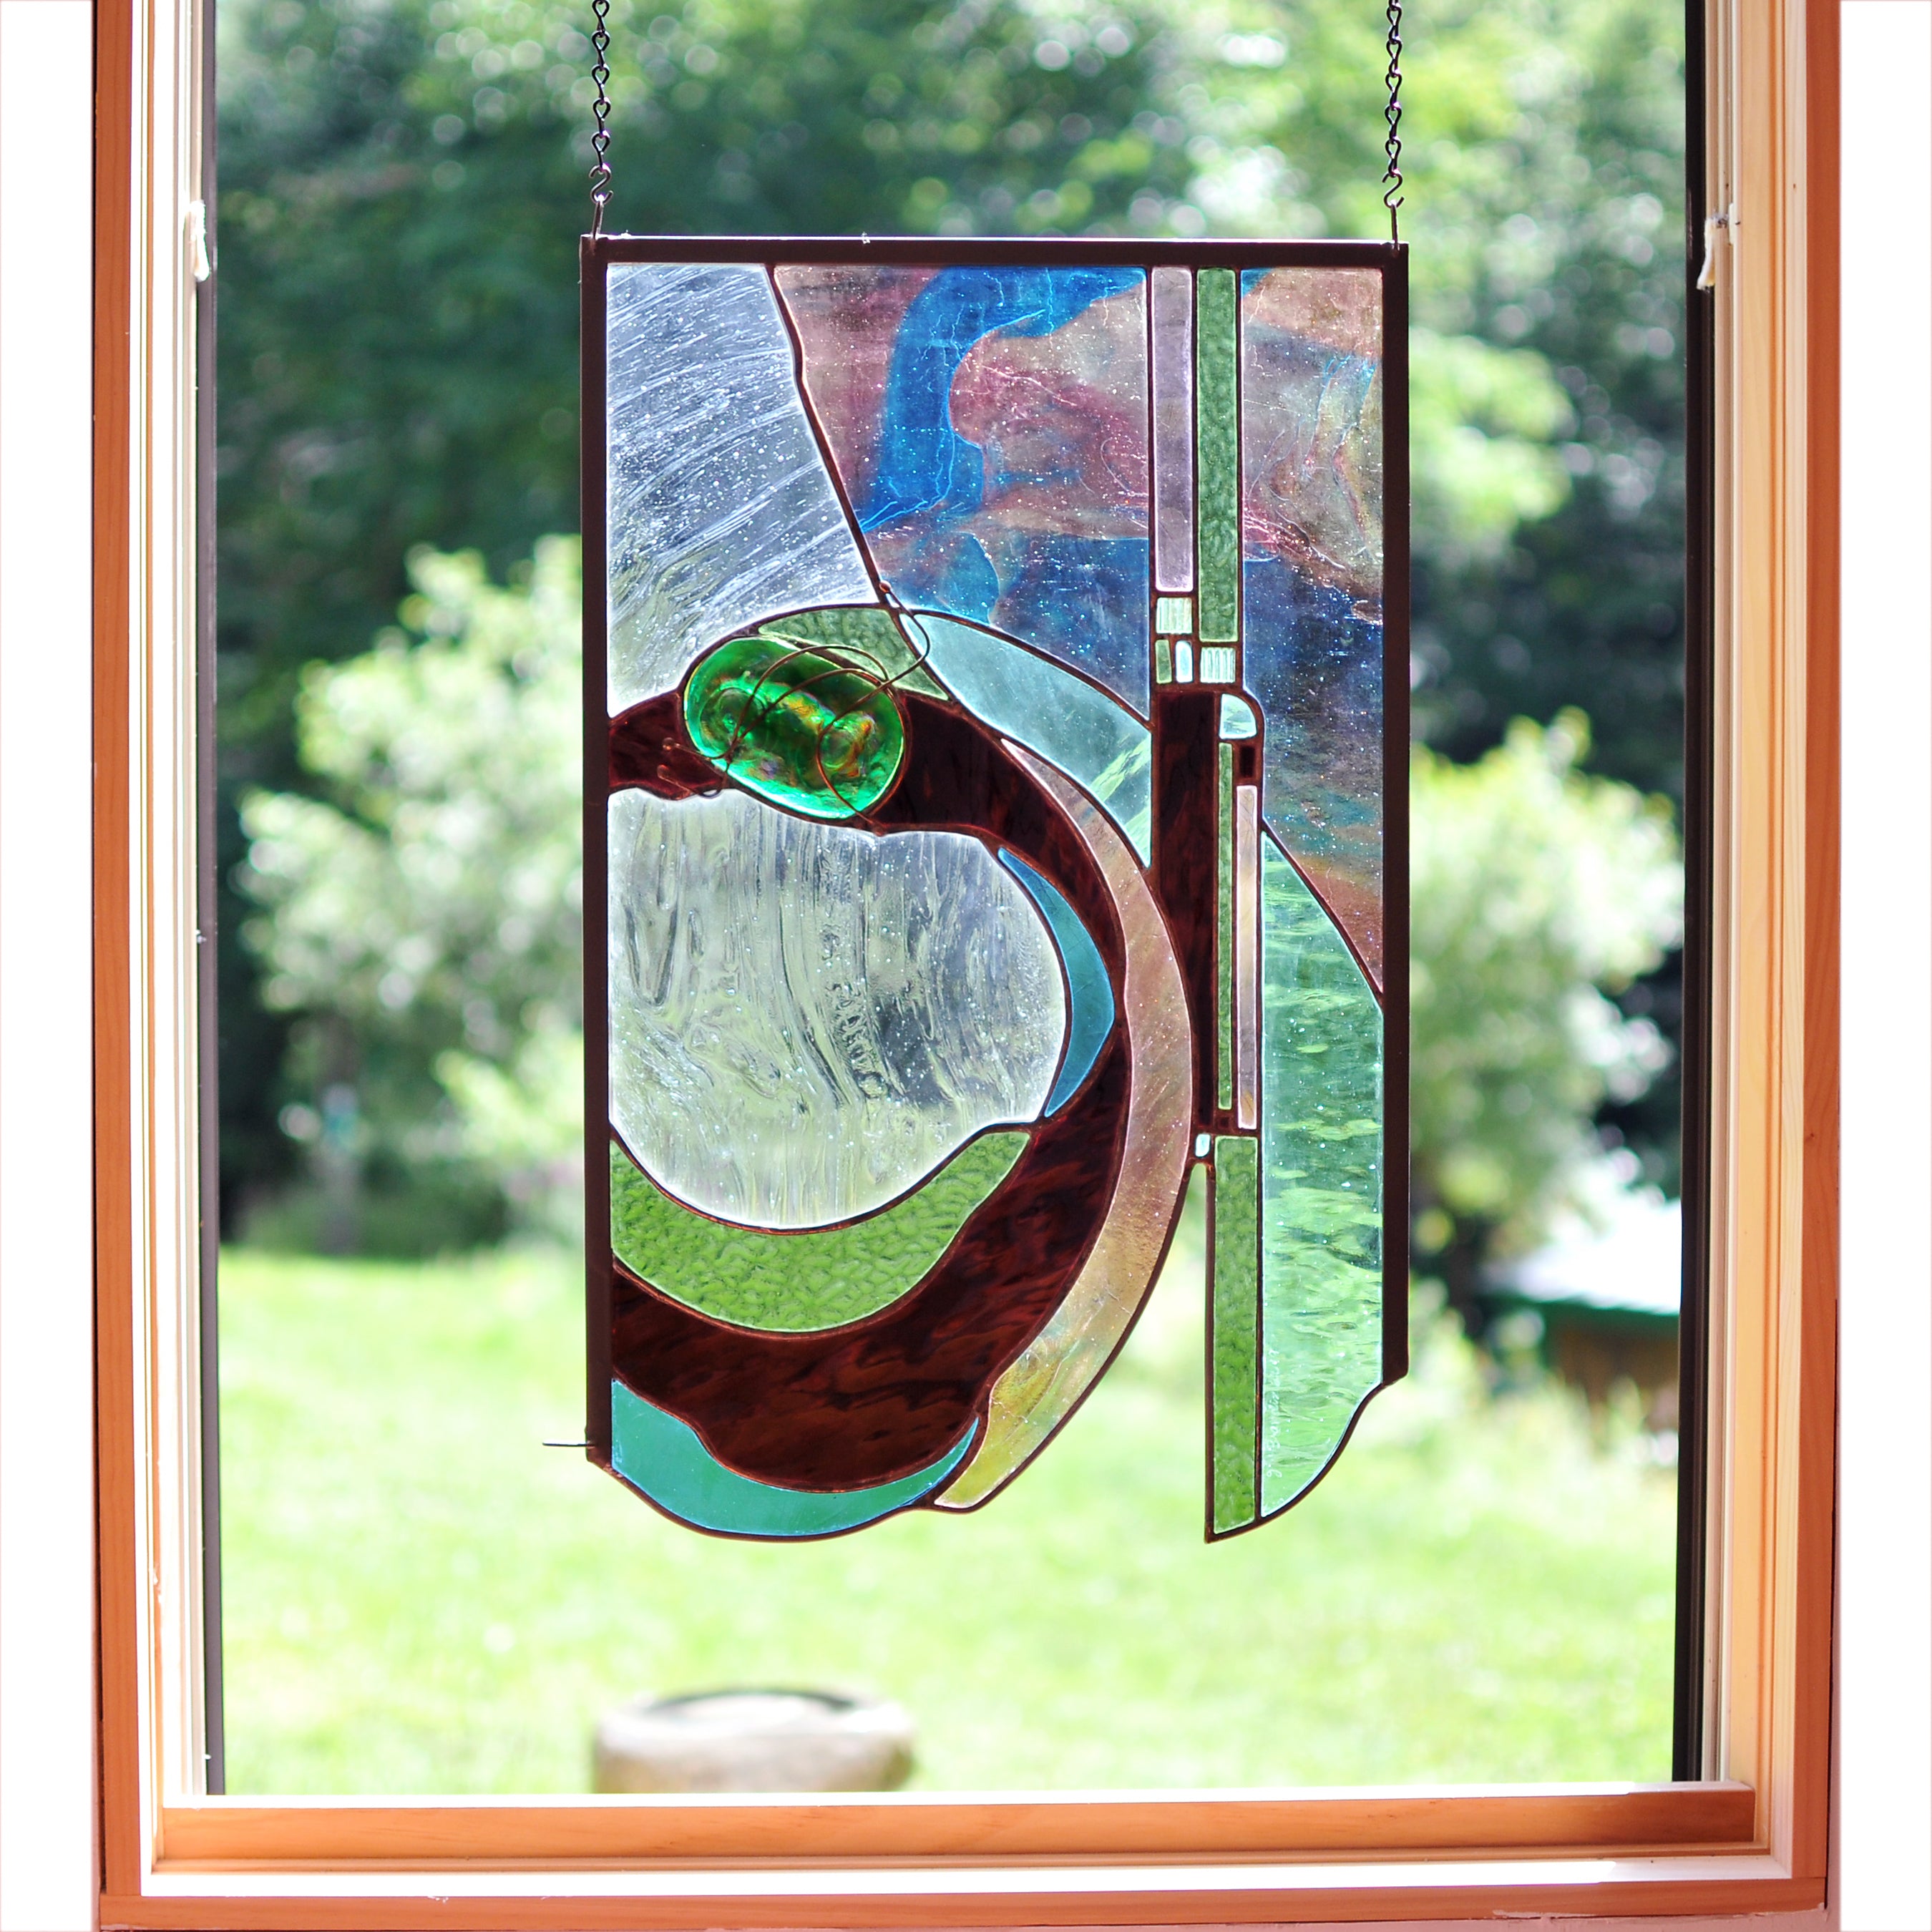 Large stained glass panel with nature inspired organic lines. Organic abstract